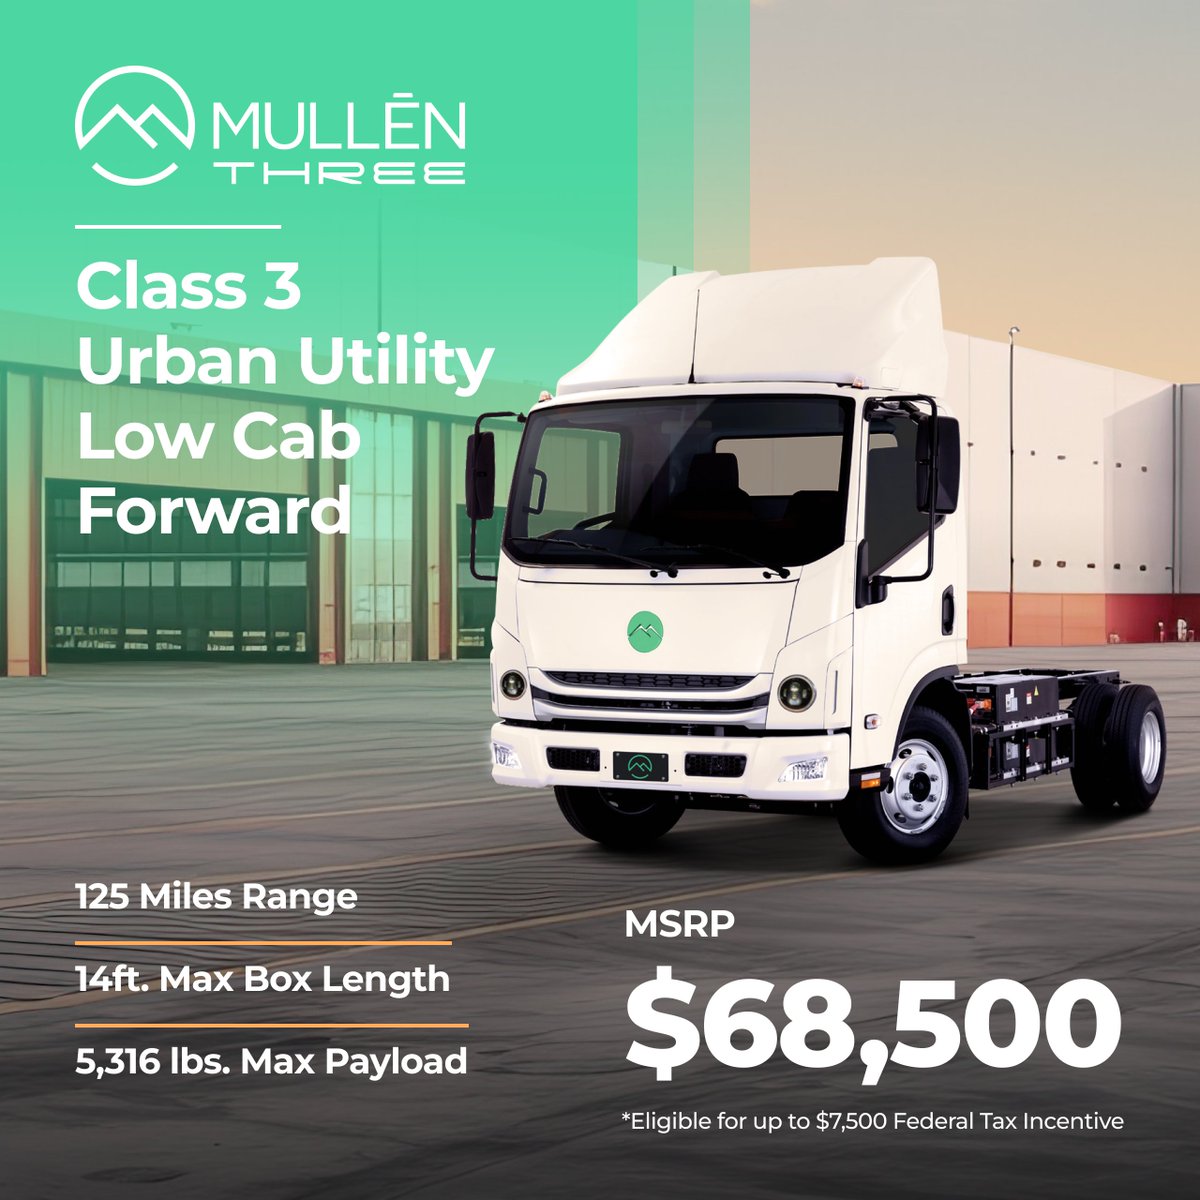 Performance, Efficiency, and Versatility — the #MullenTHREE is the #CommercialEV trifecta.

The all-electric #Class3 truck was purpose-built to meet the demands of urban last-mile delivery and can be easily upfit to meet a variety of vocational needs.

Available now, find out how…